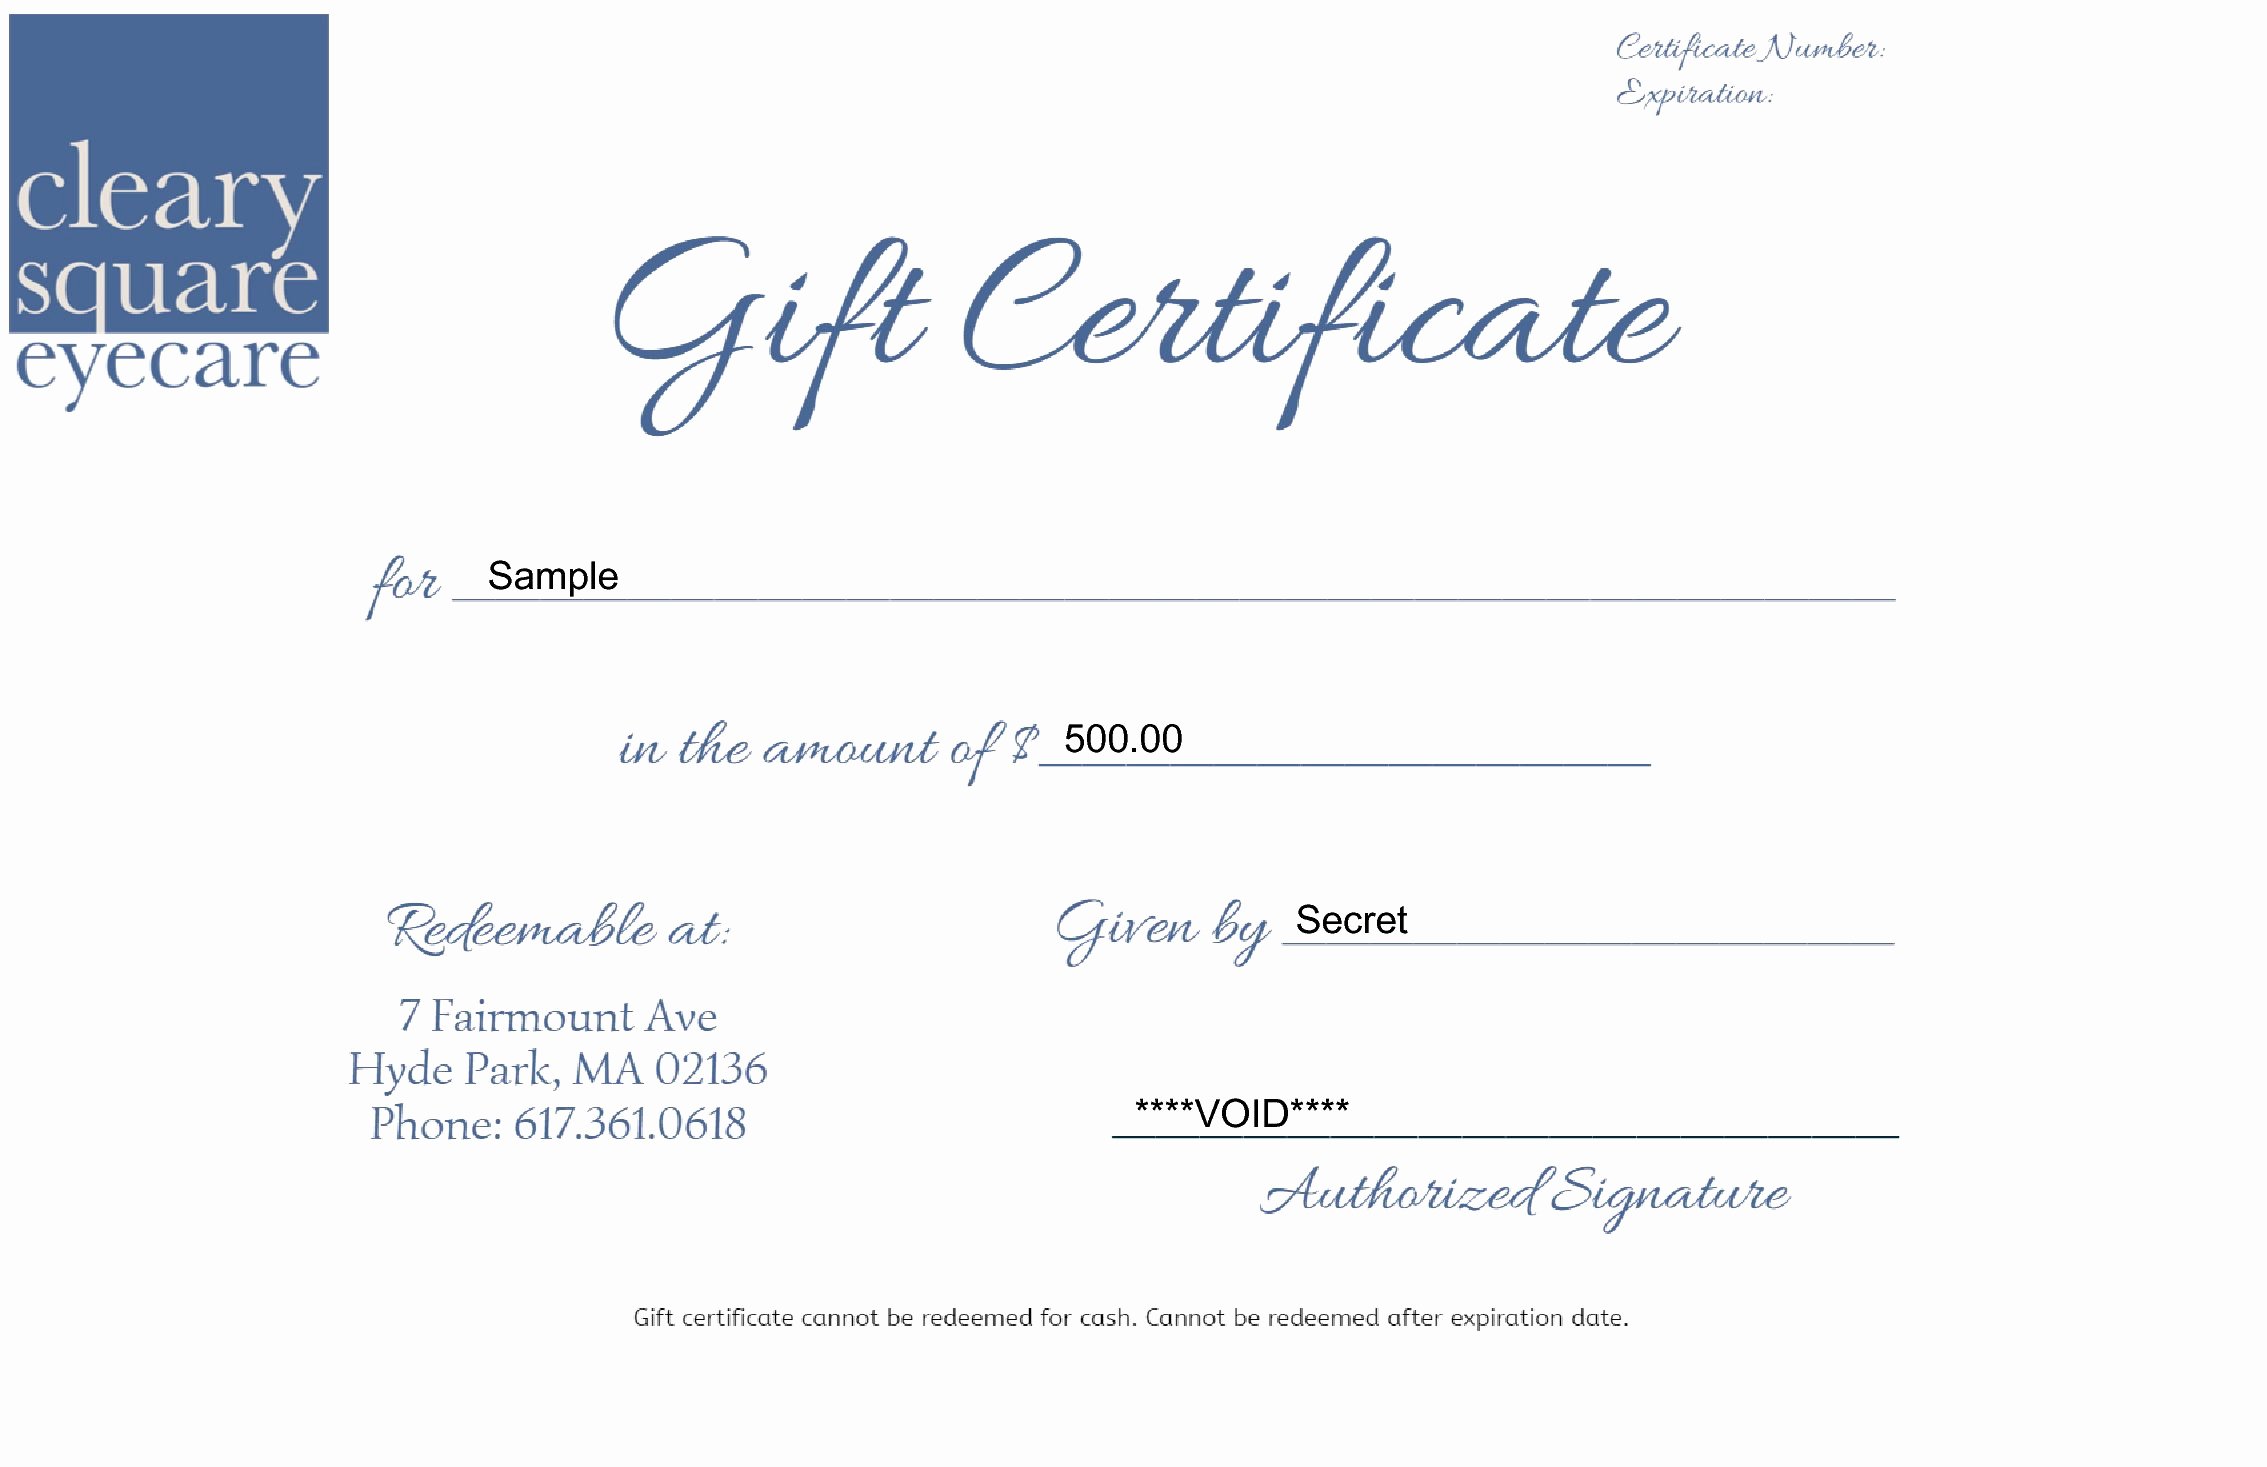 Flipside Products Certificate Template Beautiful Gift Certificate for 1000 – Cse